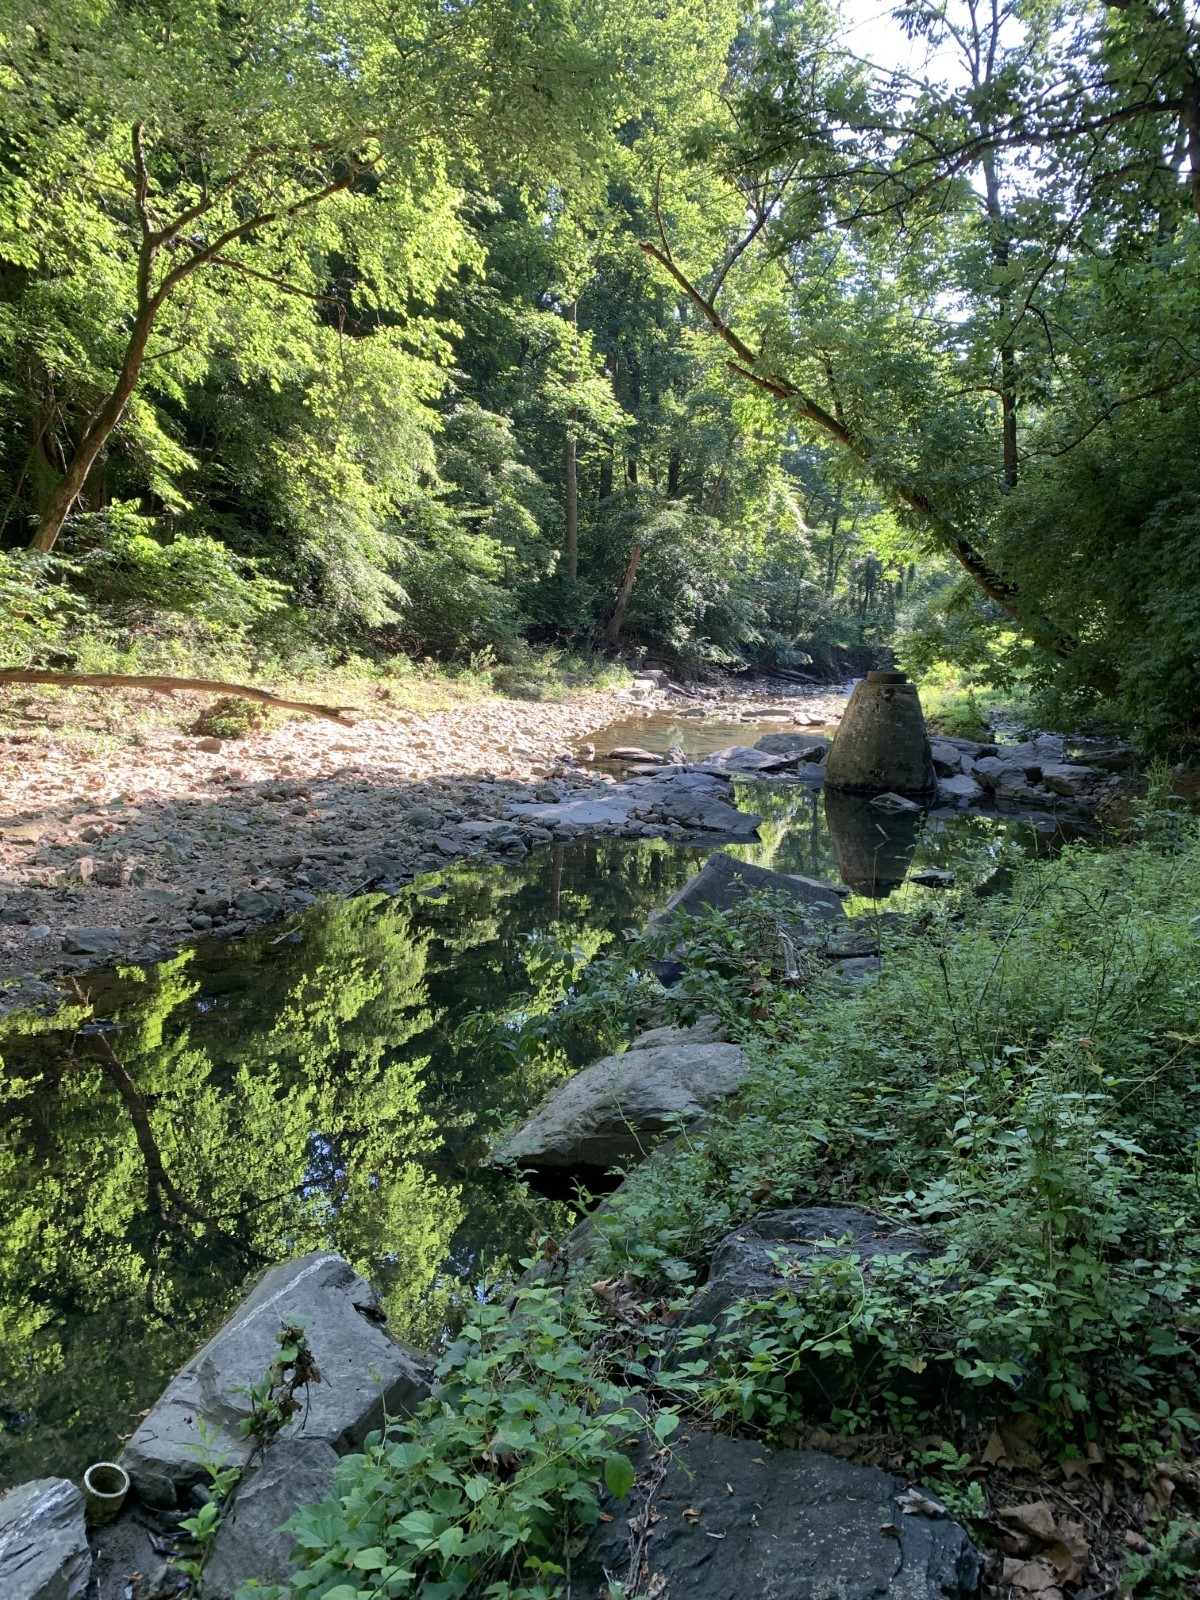 An outdoor photo of a stream surrounded by foliage